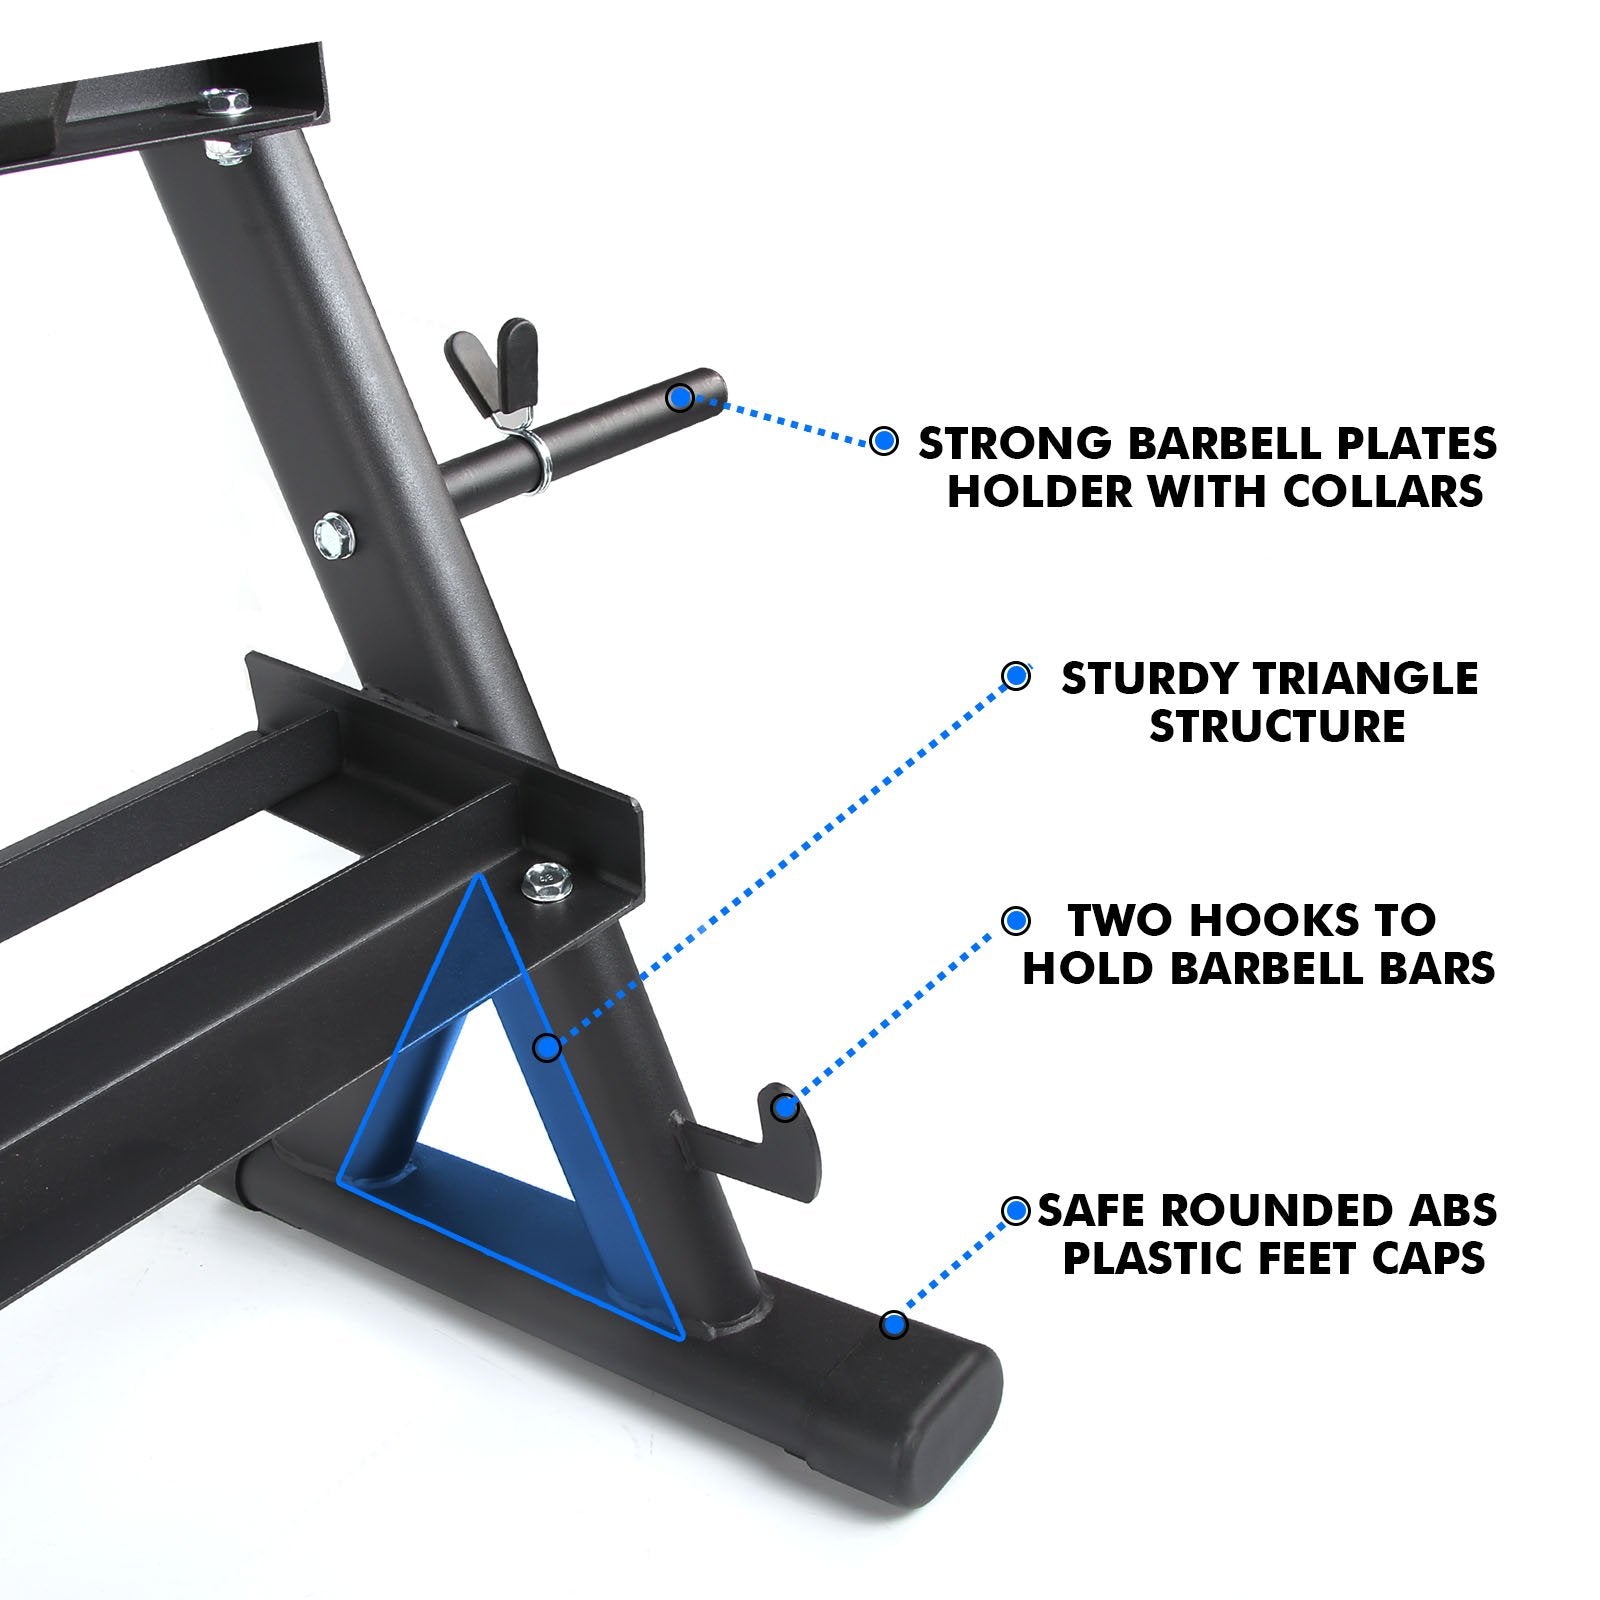 Dumbbell and Barbell Plates Rack Details